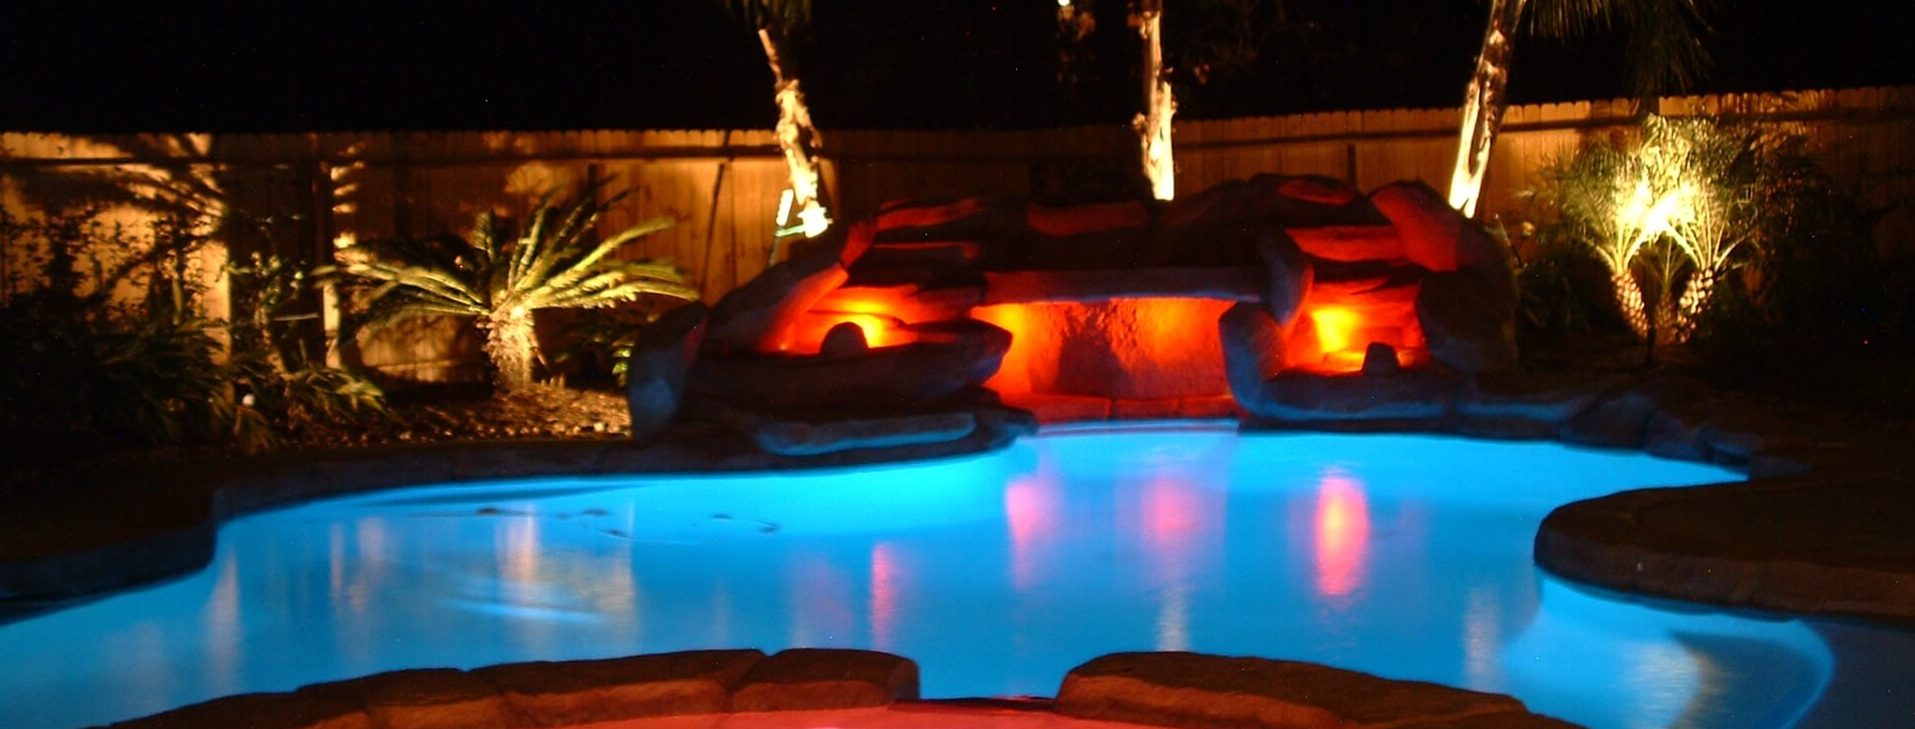 Take Your Backyard Pool Up 10 Notches with LED Lighting